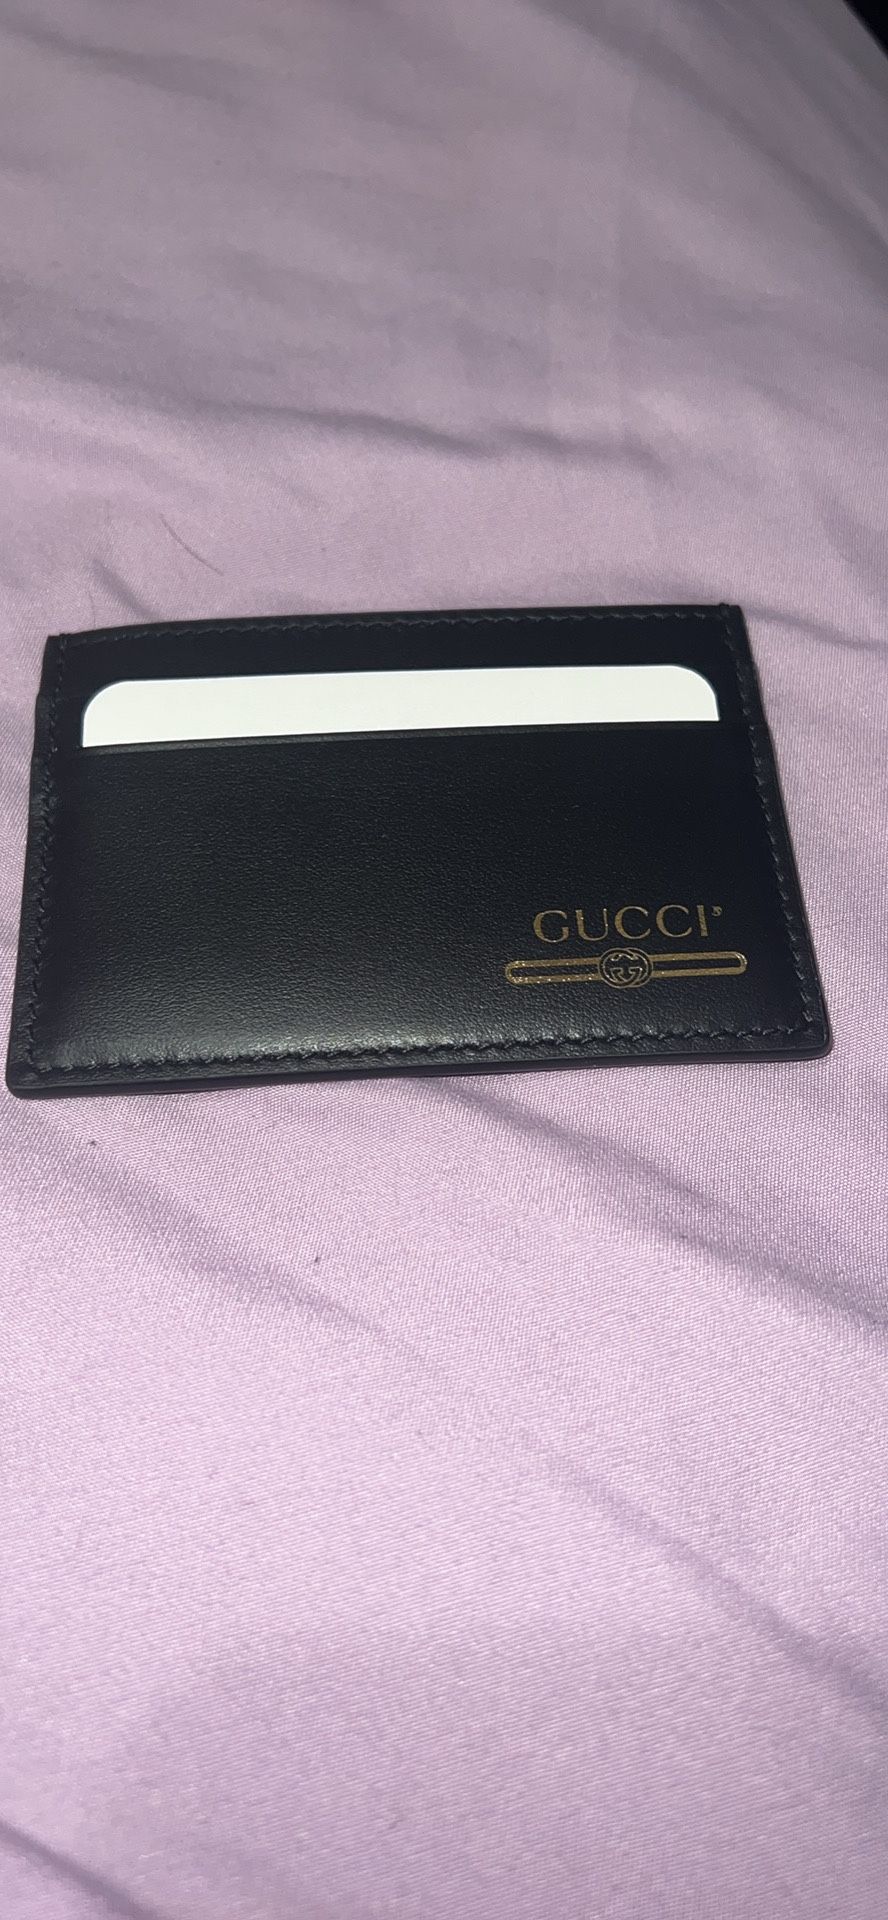 *Brand new & Authentic* Gucci Card Holder